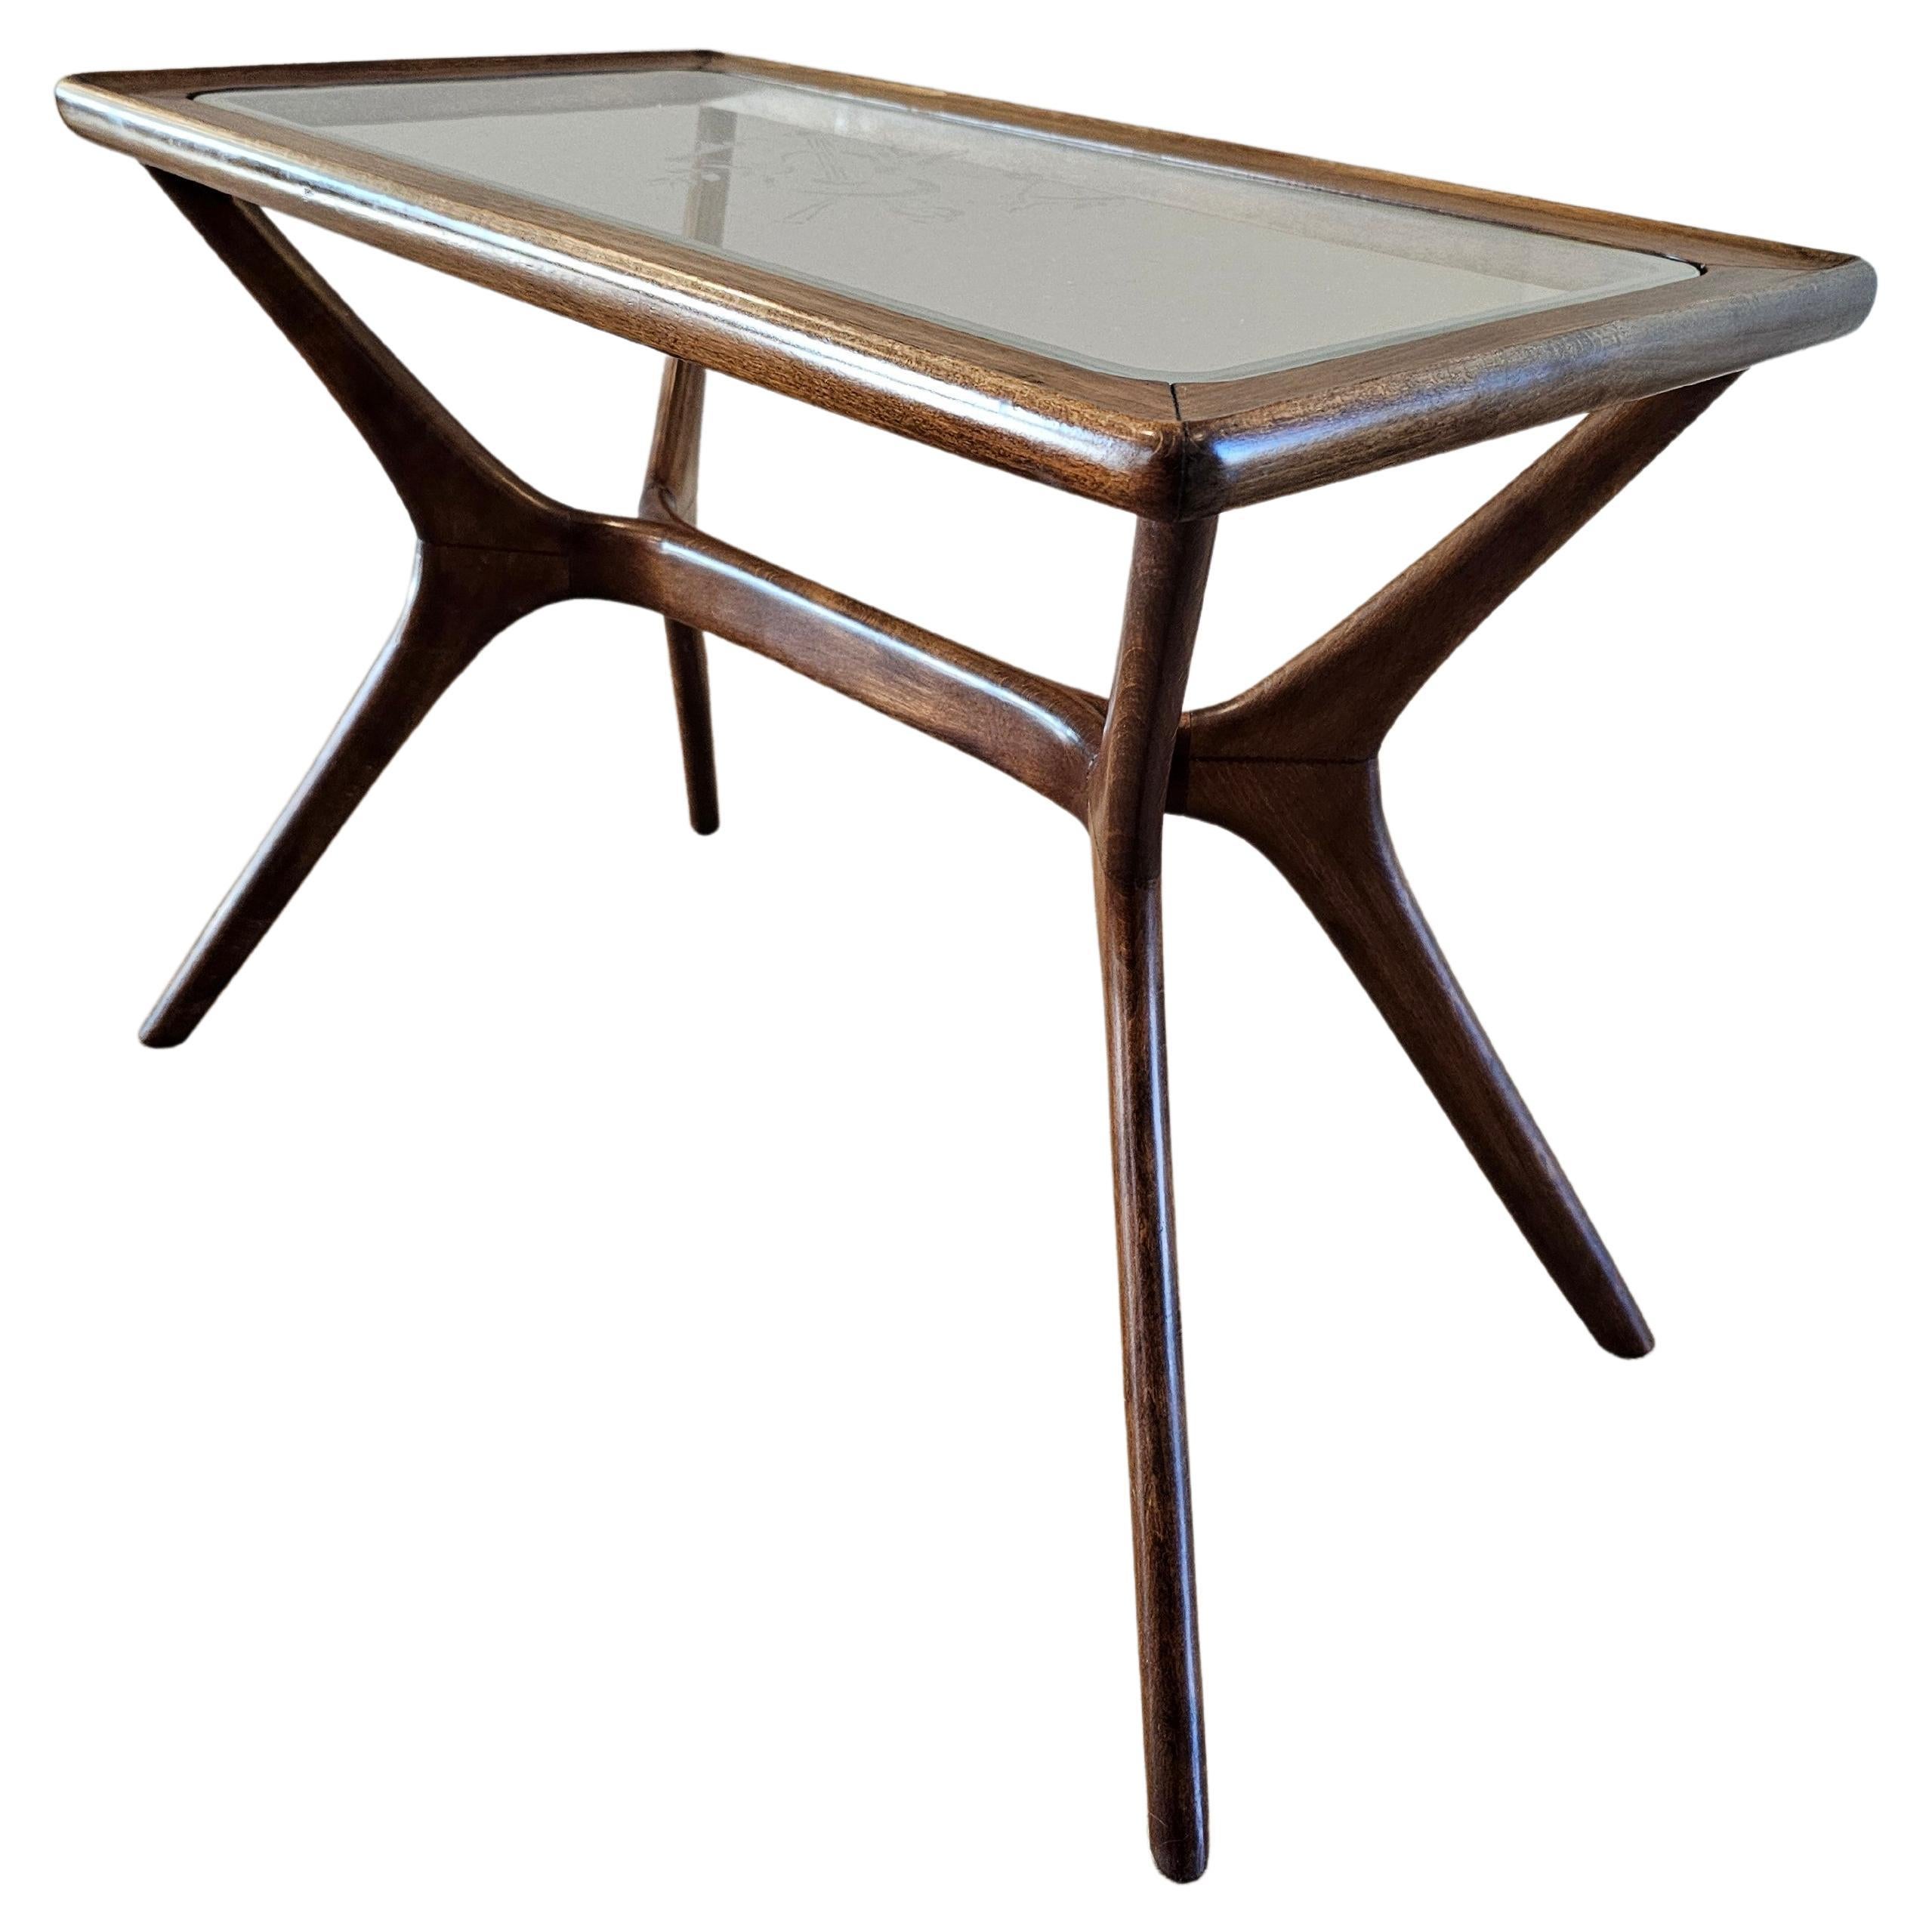 An original mid-century modern side table, in the manner of legendary Italian modernist architect and designer Ico Parisi (1916-1996)

Italy, circa 1950s, having a rectangular inset glass tabletop with sophisticated etched violin design, rising on a